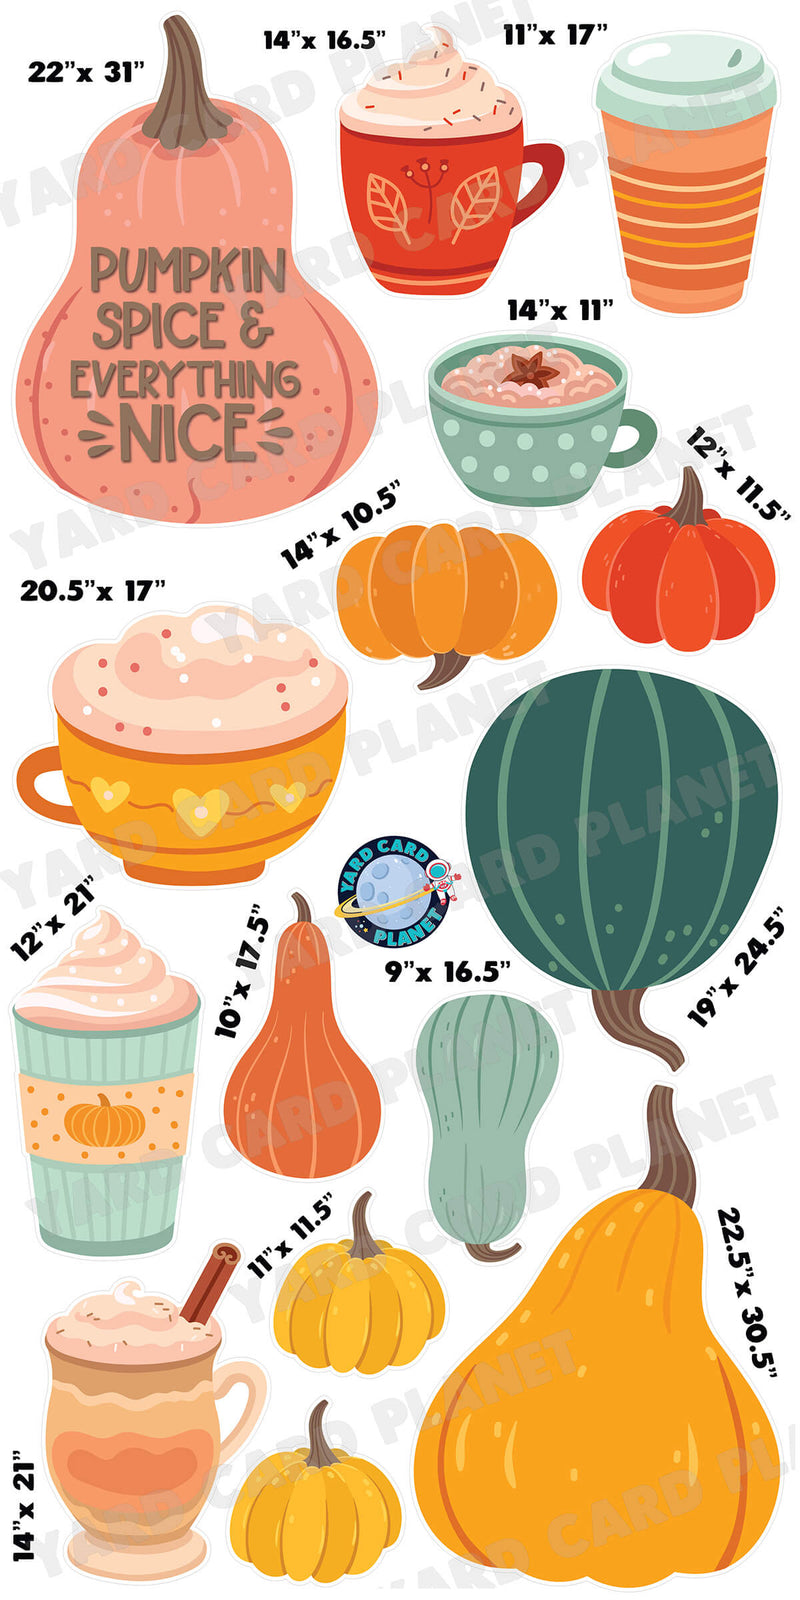 Pumpkin Spice and Everything Nice Yard Card Flair Set with Measurements